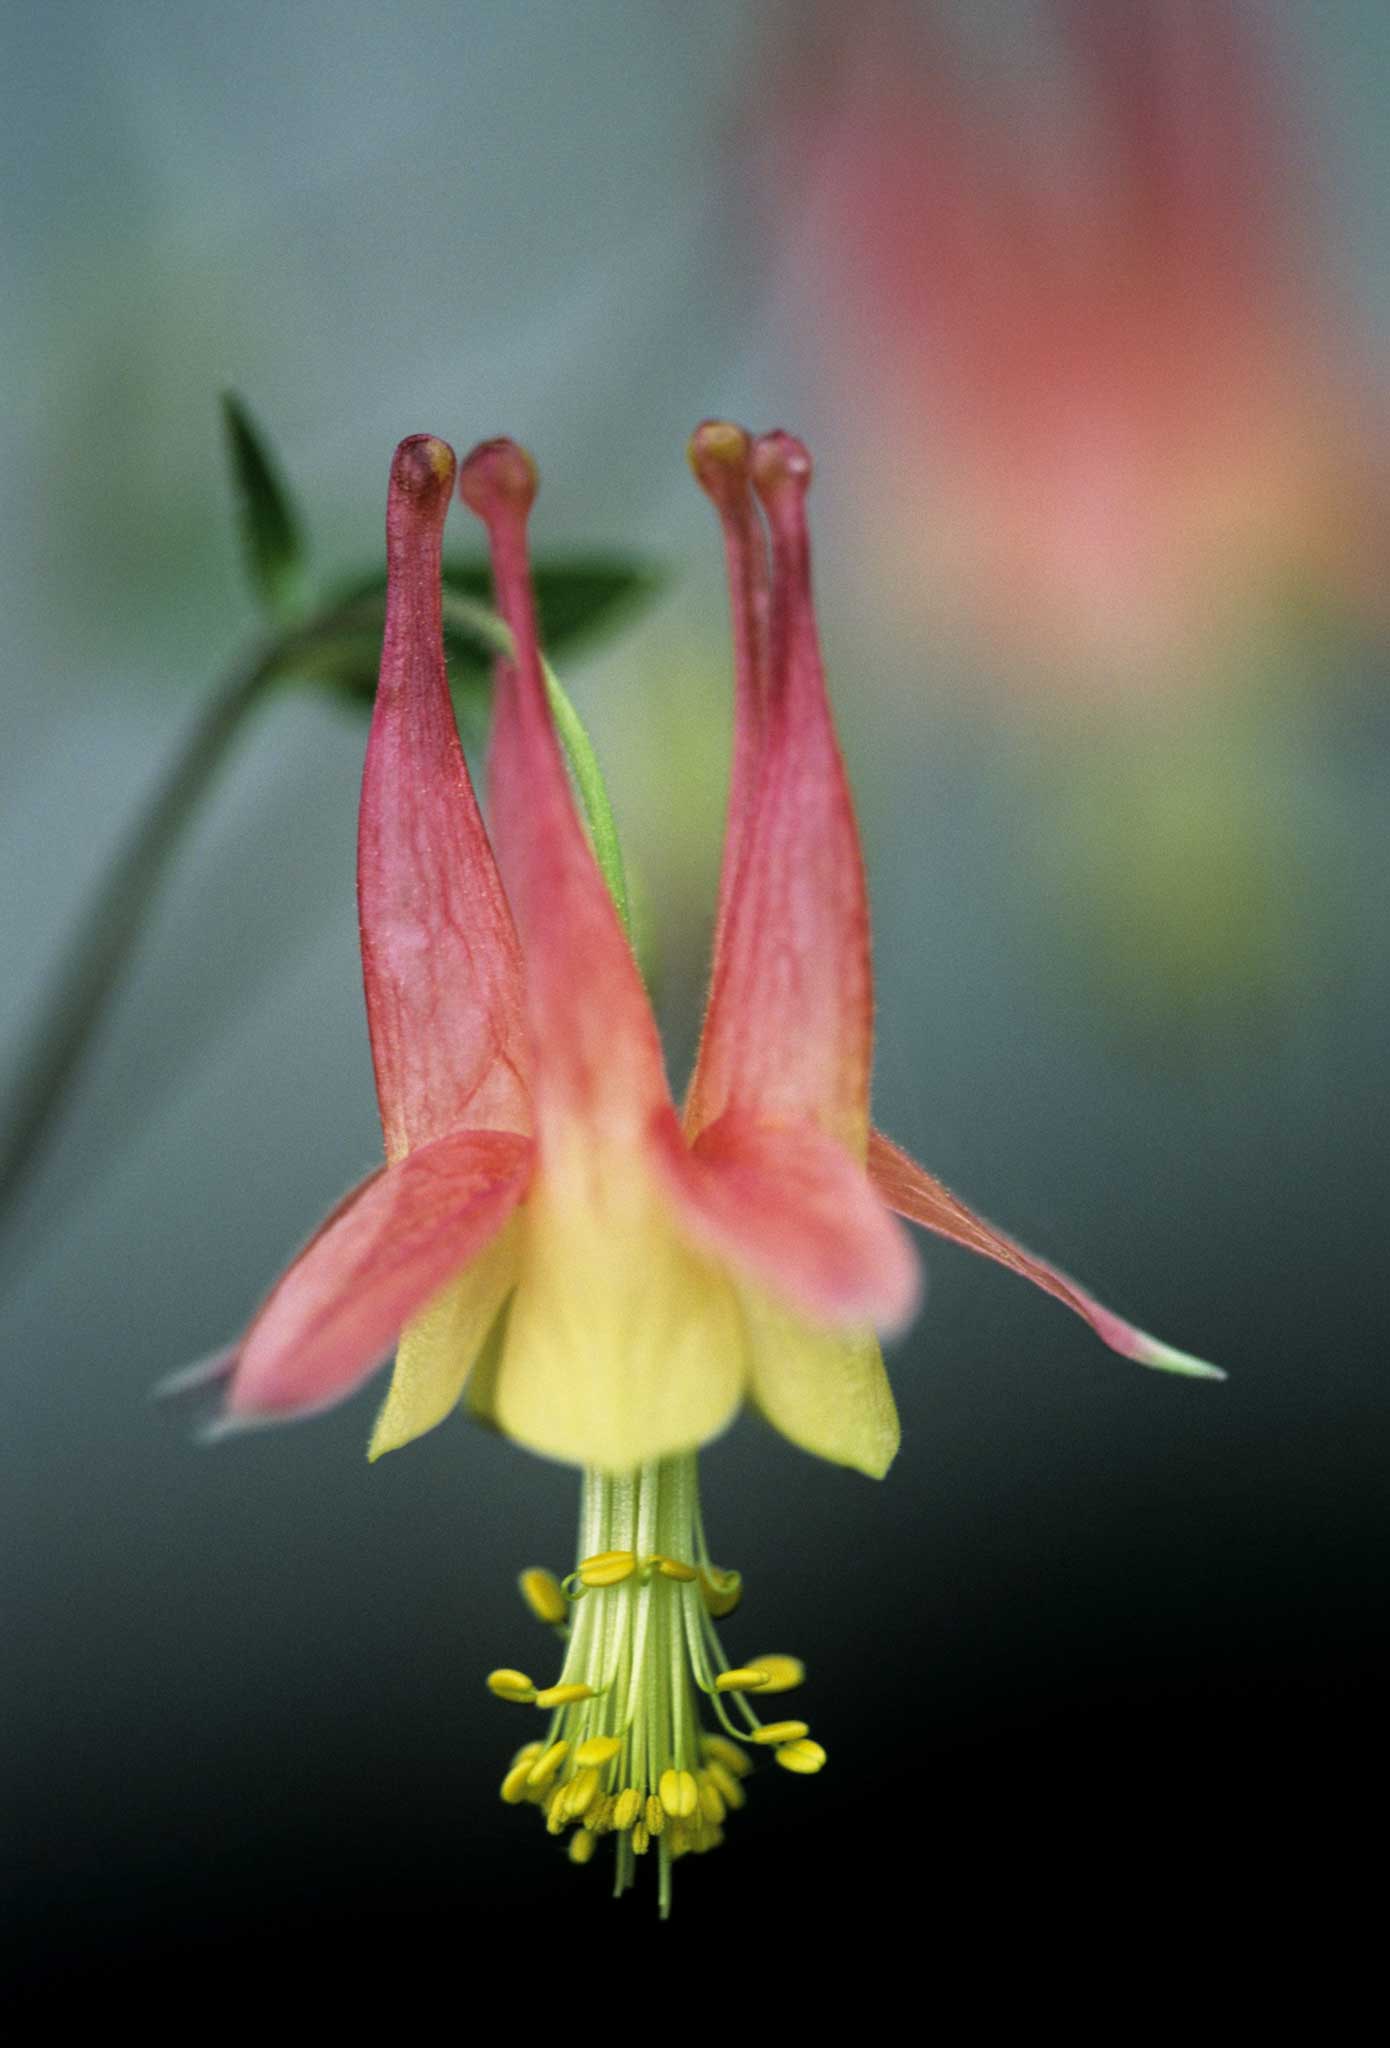 In the pink: Aquilegia, or Granny's Bonnet